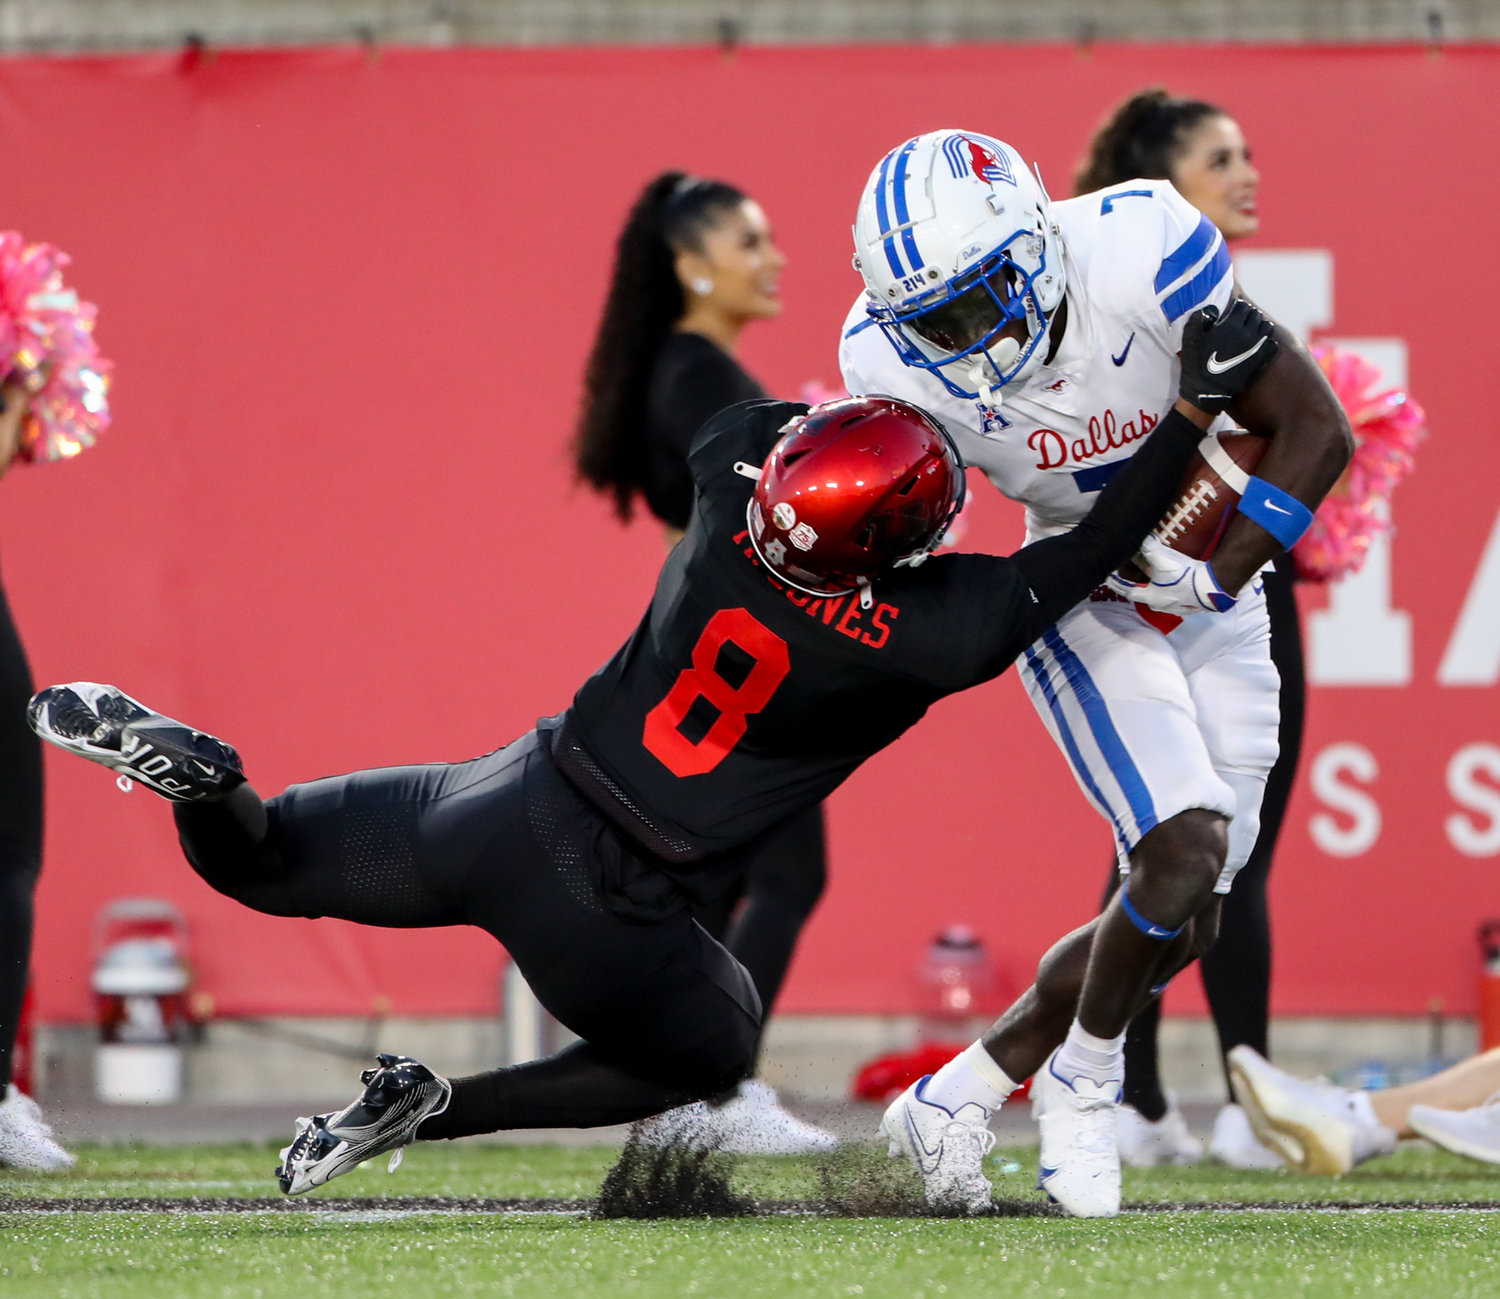 Houston Cougars cornerback Marcus Jones (8) brings down SMU Mustangs running back Ulysses Bentley IV (7) after a catch during an NCAA football game between Houston and SMU on October 30, 2021 in Houston, Texas.